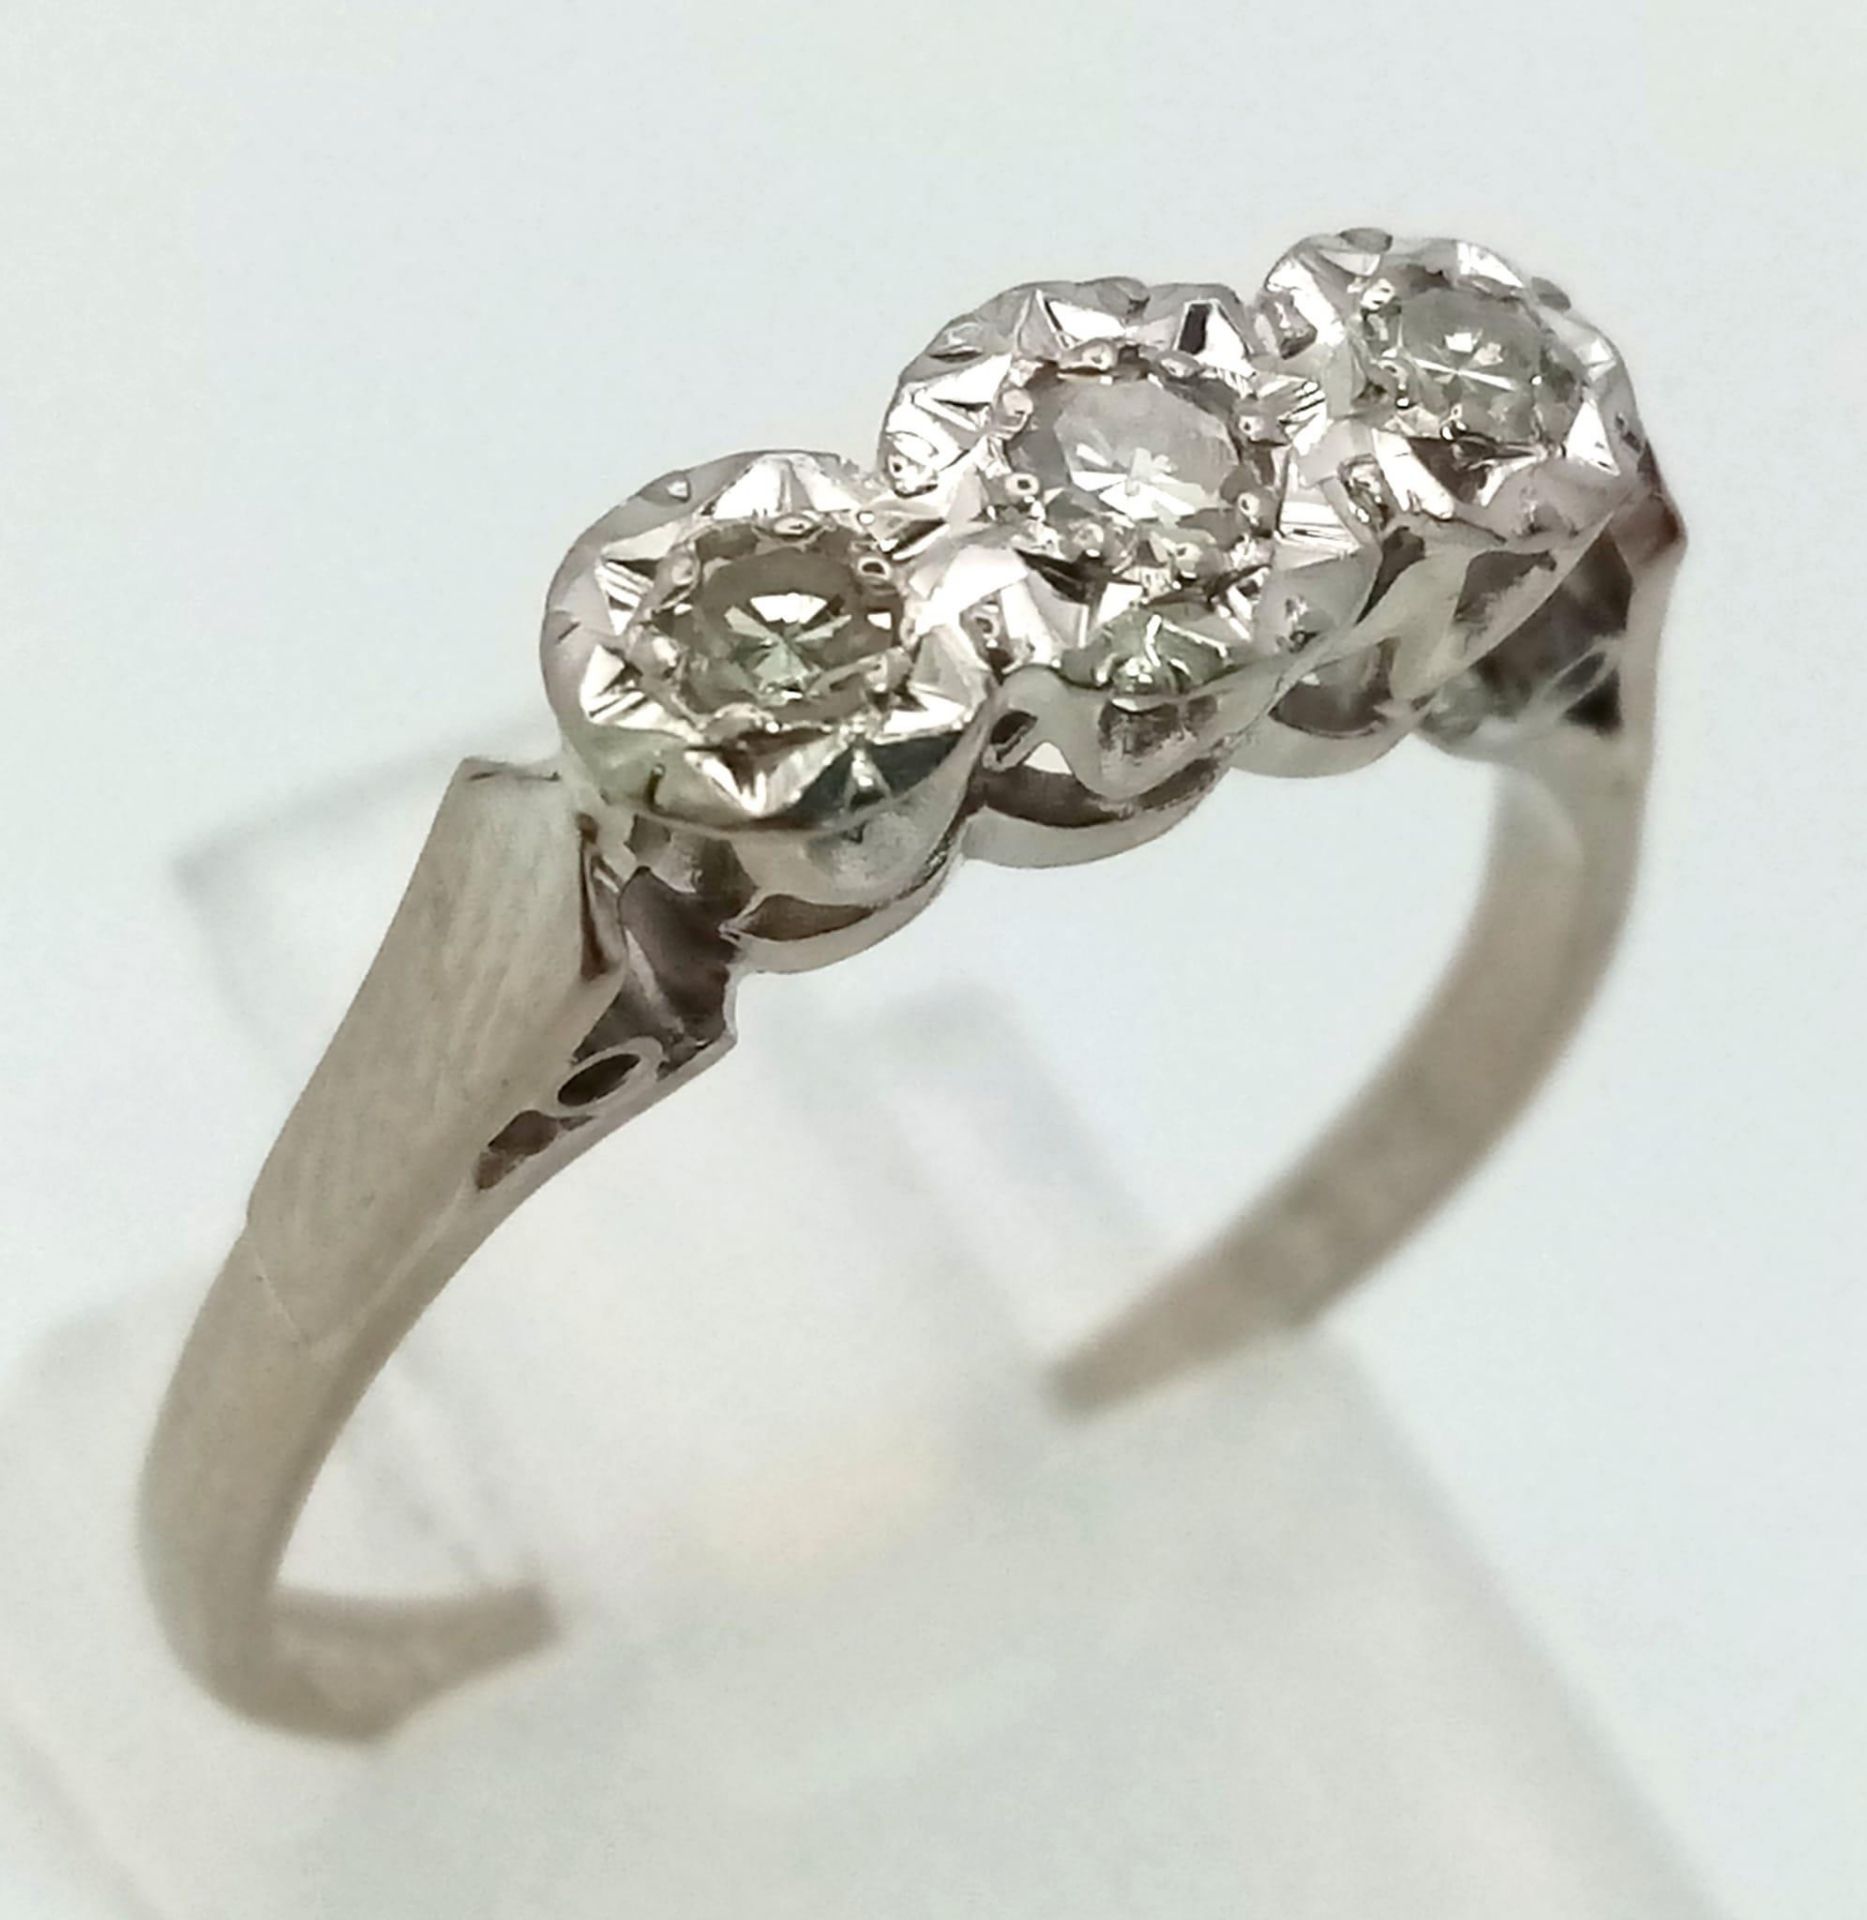 An 18K White Gold Three Stone Diamond Ring. Size N. 3.05g total weight. - Image 2 of 4